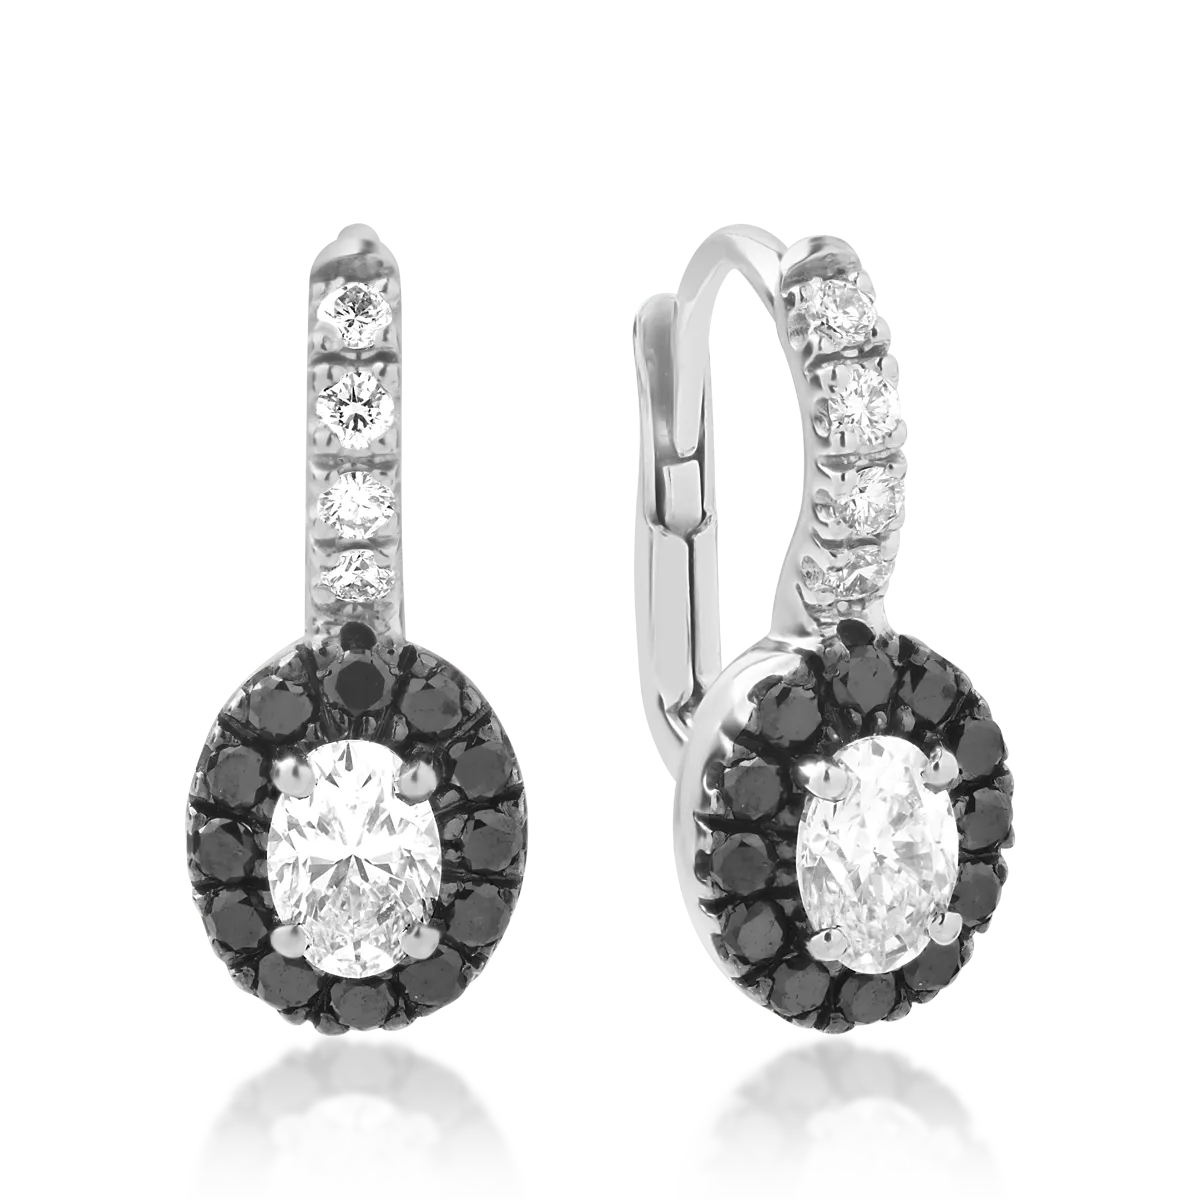 18K white gold earrings with 0.74ct clear diamonds and 0.32ct black diamonds